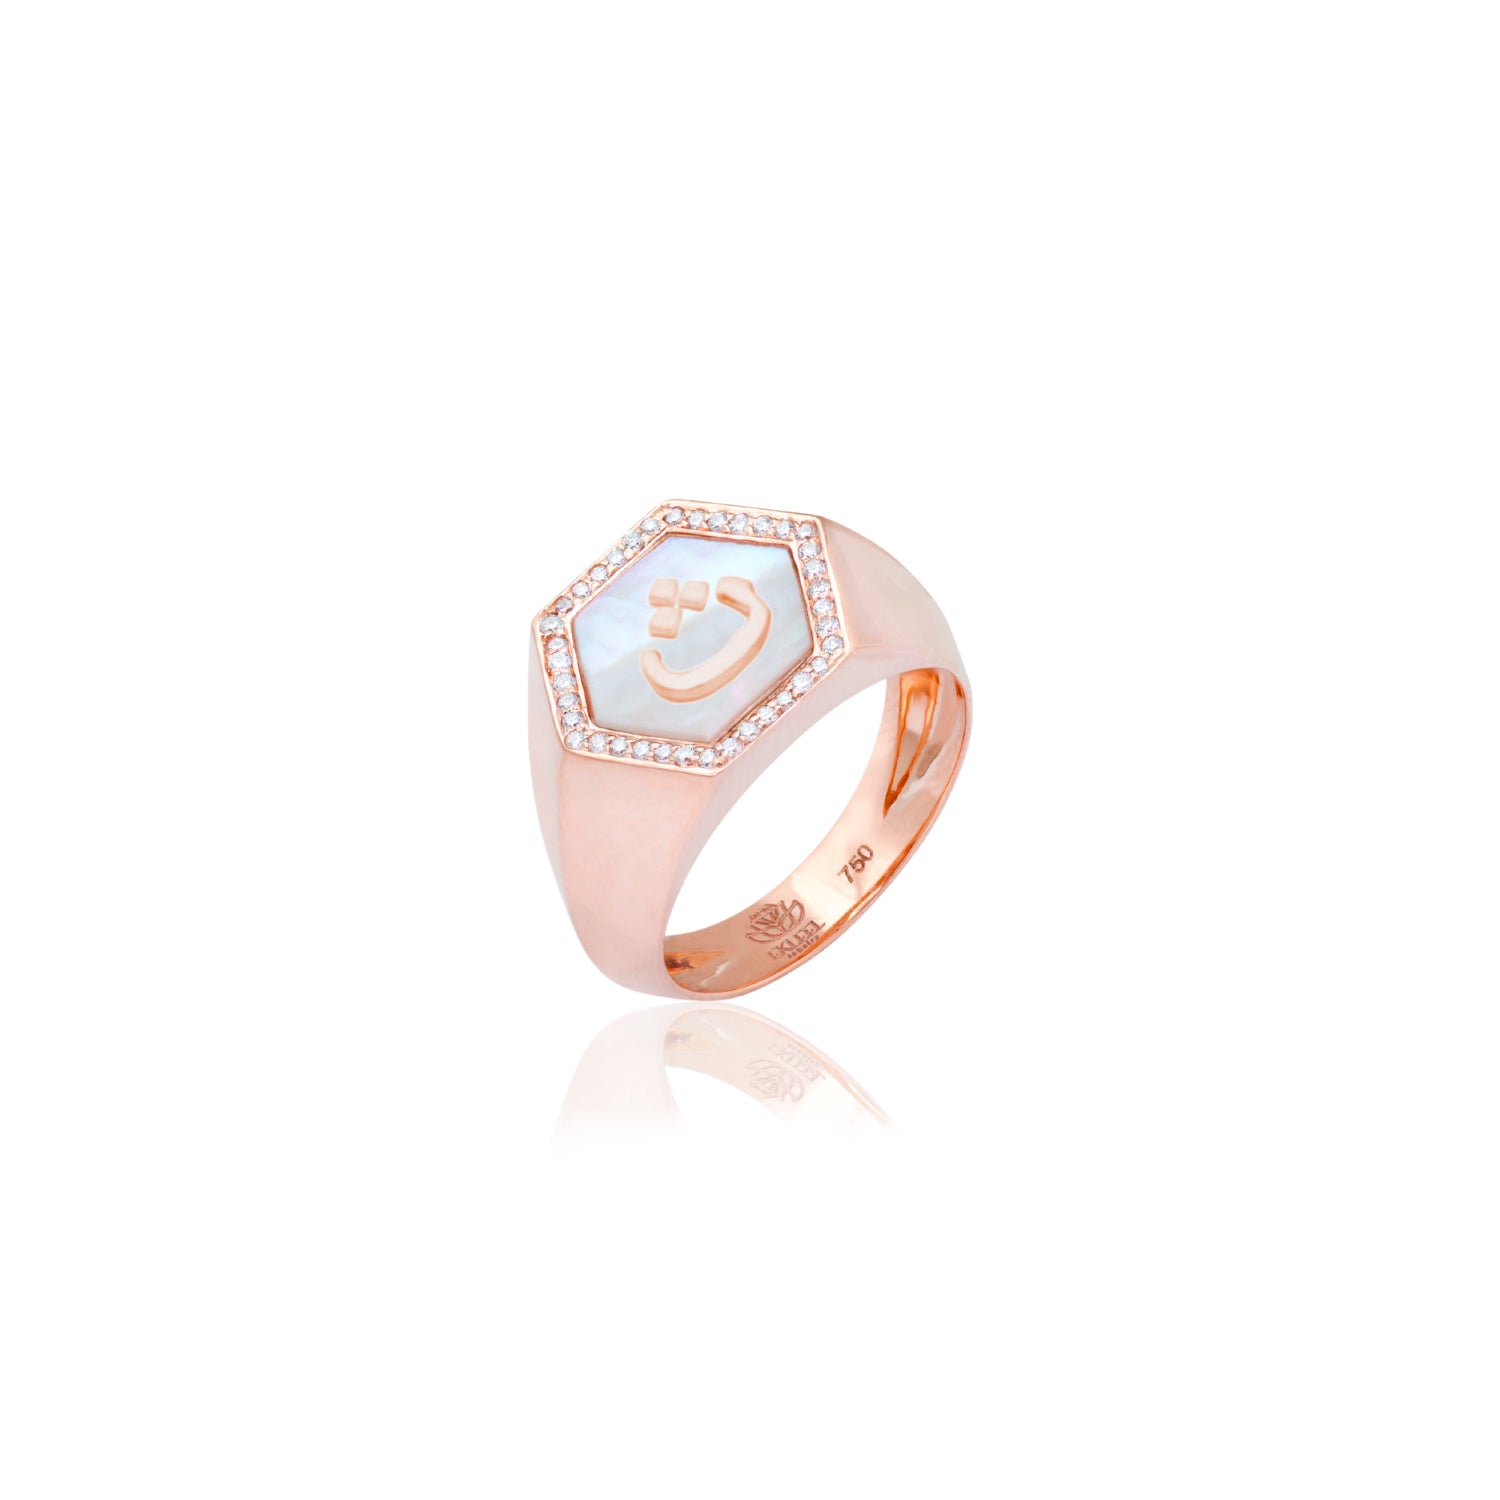 Qamoos 2.0 Letter ث White Mother of Pearl and Diamond Signet Ring in Rose Gold